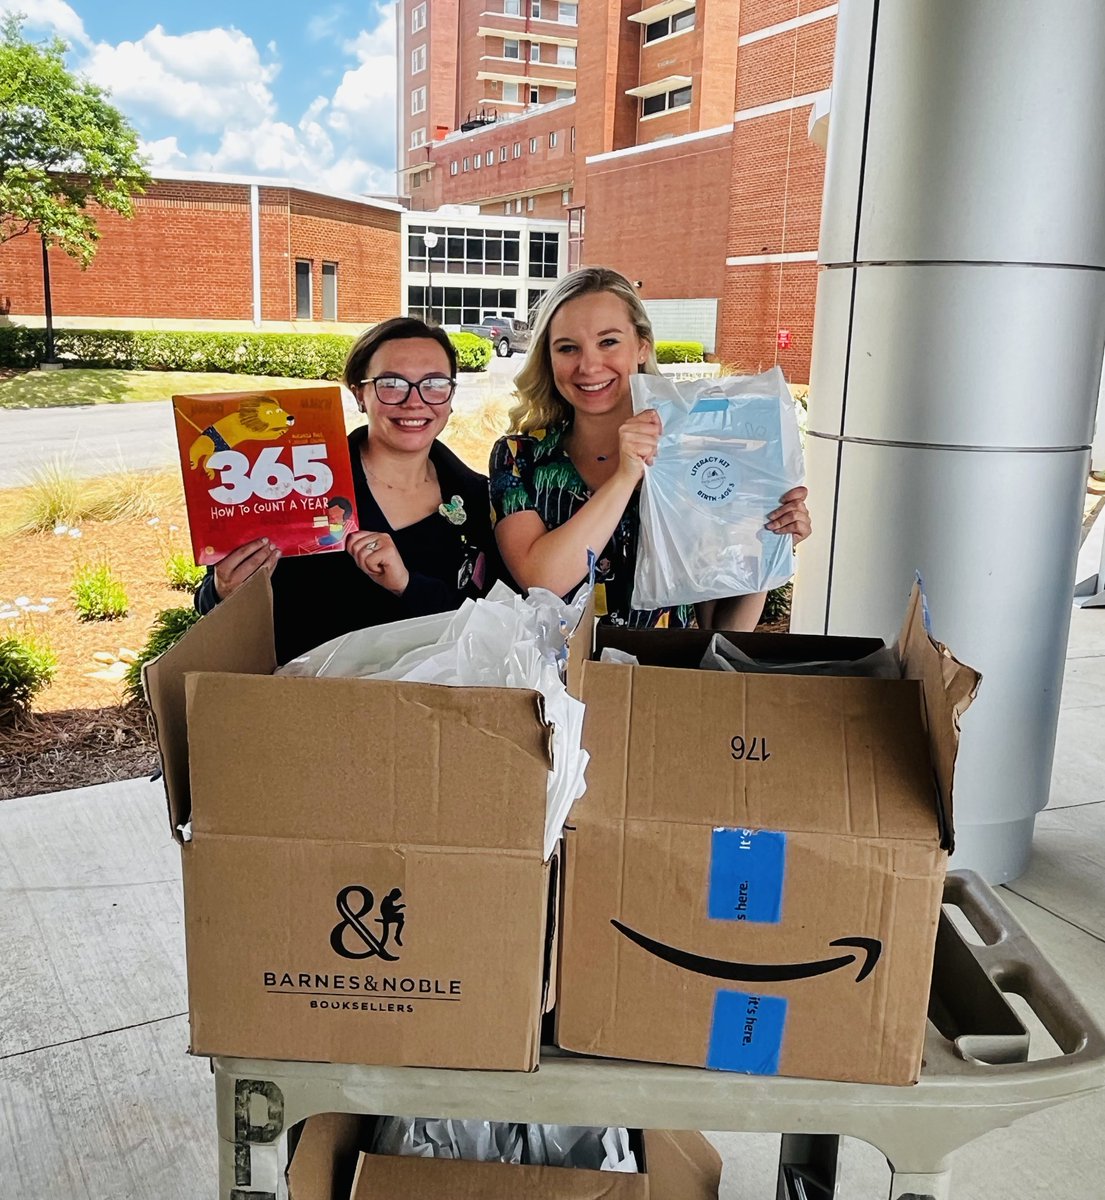 Last week, our team had the privilege of delivering more literacy kits to the pediatric floor of DCH Health System!  From captivating books to engaging activities and crafts, these kits are designed to inspire and empower our little readers. #accesstobooks #communitypartnerships